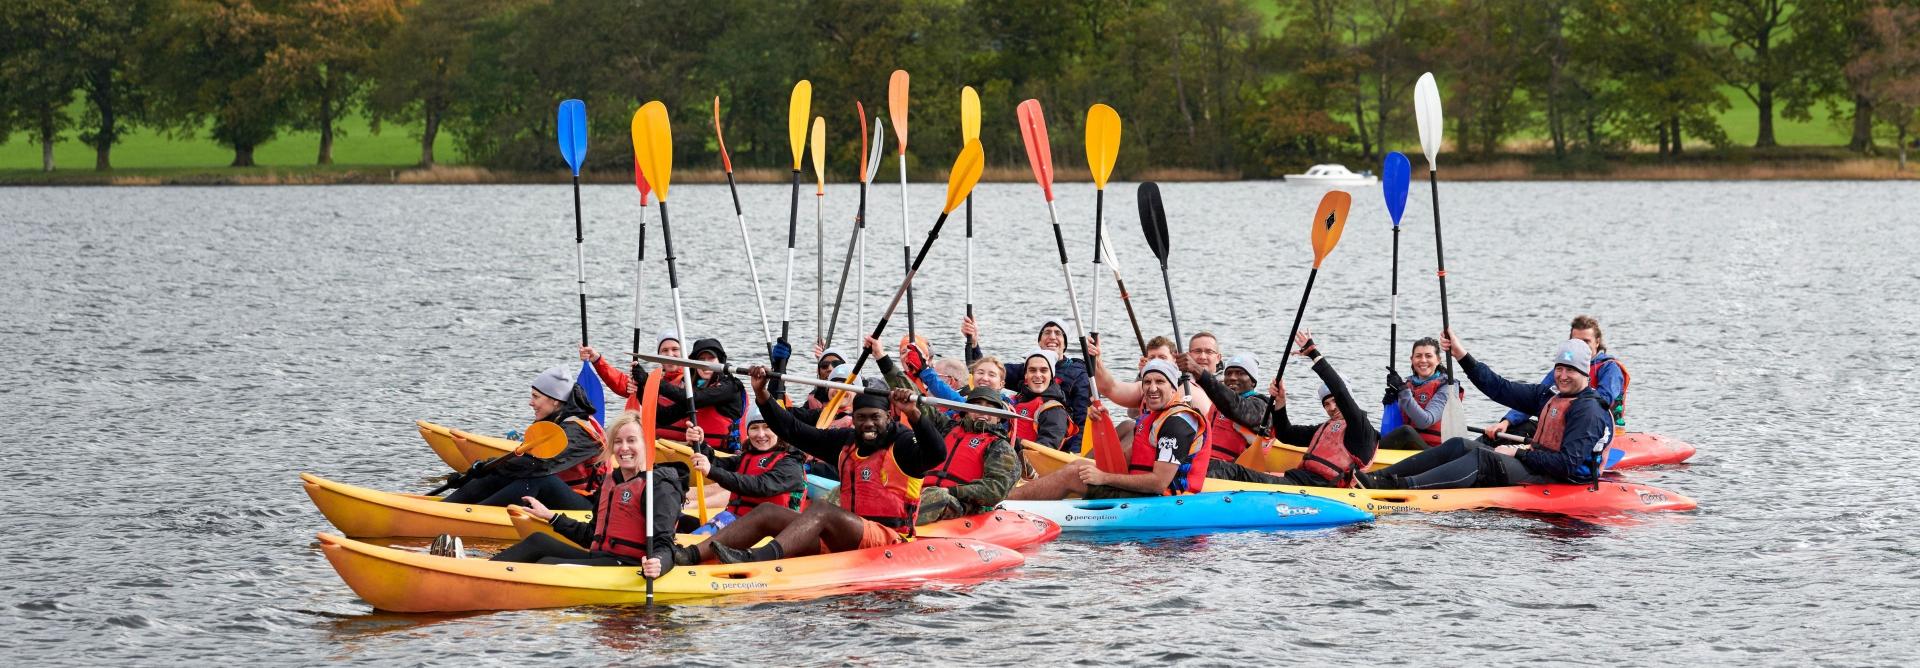 Fundraisers in a kayak during the Lakes District Triple, to raise money for Future Dreams breast cancer charity